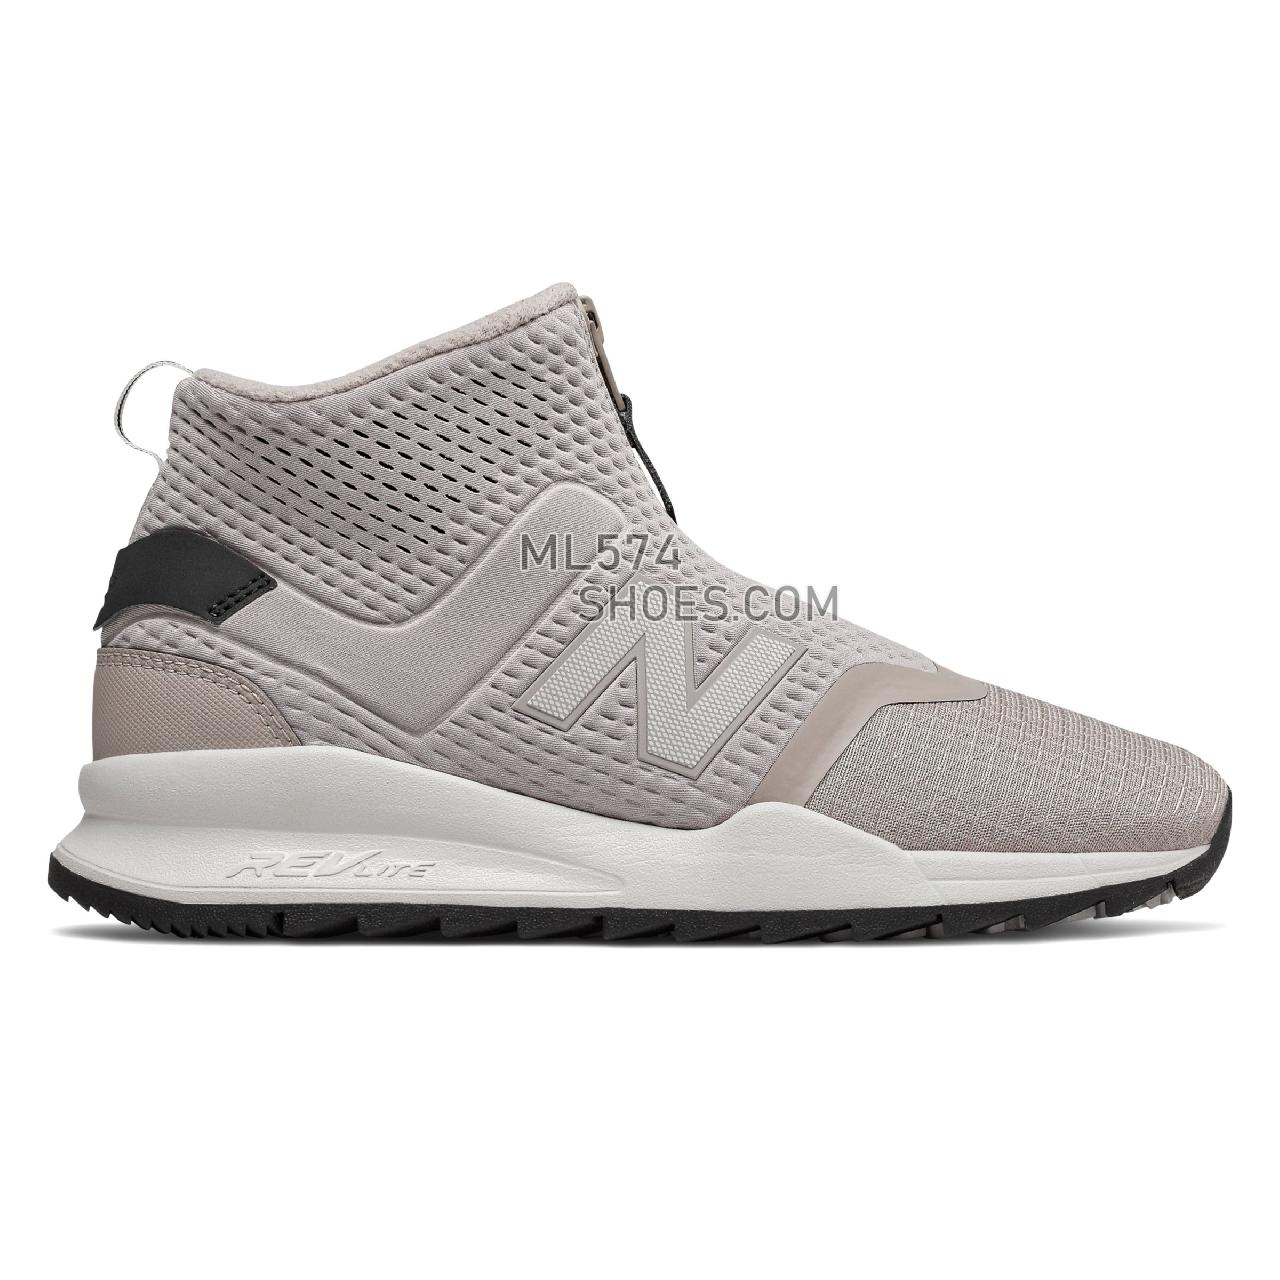 New Balance 247 Mid - Women's 247 - Classic Flat White with Black - WS247MCB